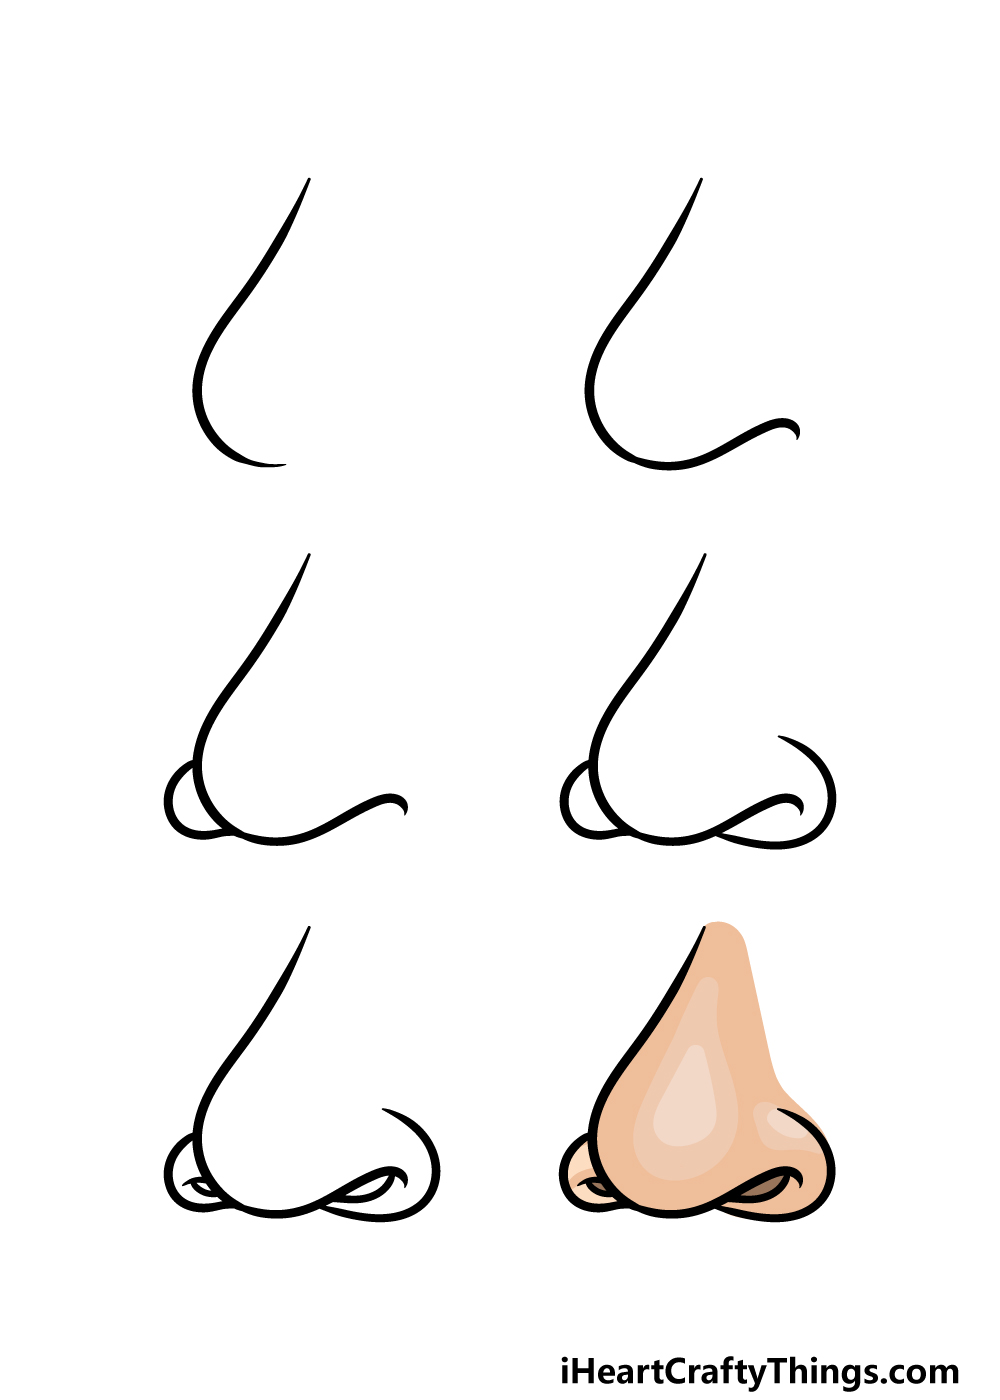 Cartoon Nose Drawing - How To Draw A Cartoon Nose Step By Step